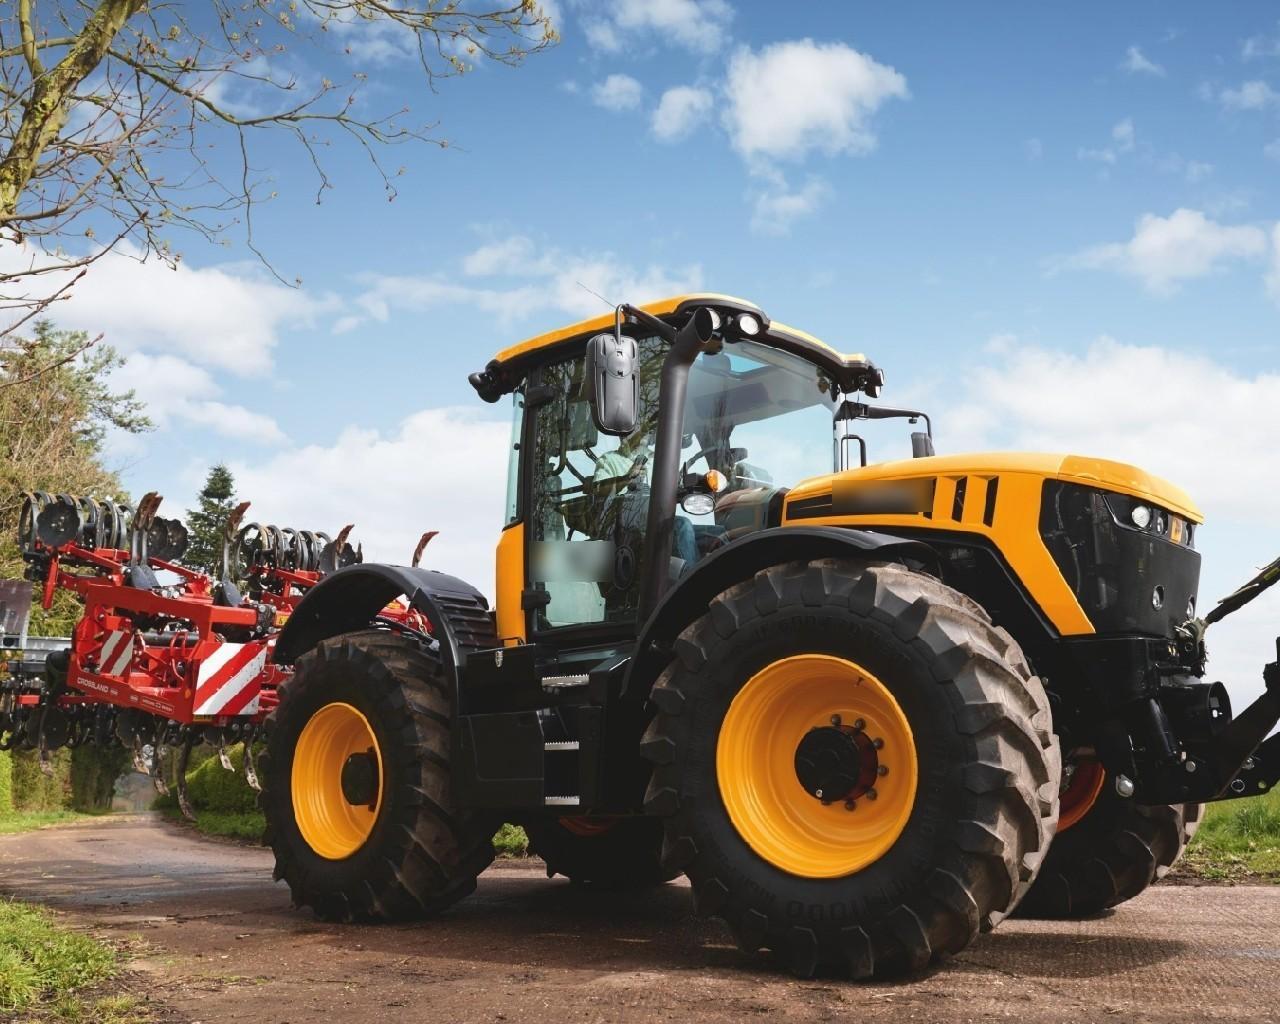 New Wallpaper Jcb Tractors For Android Apk